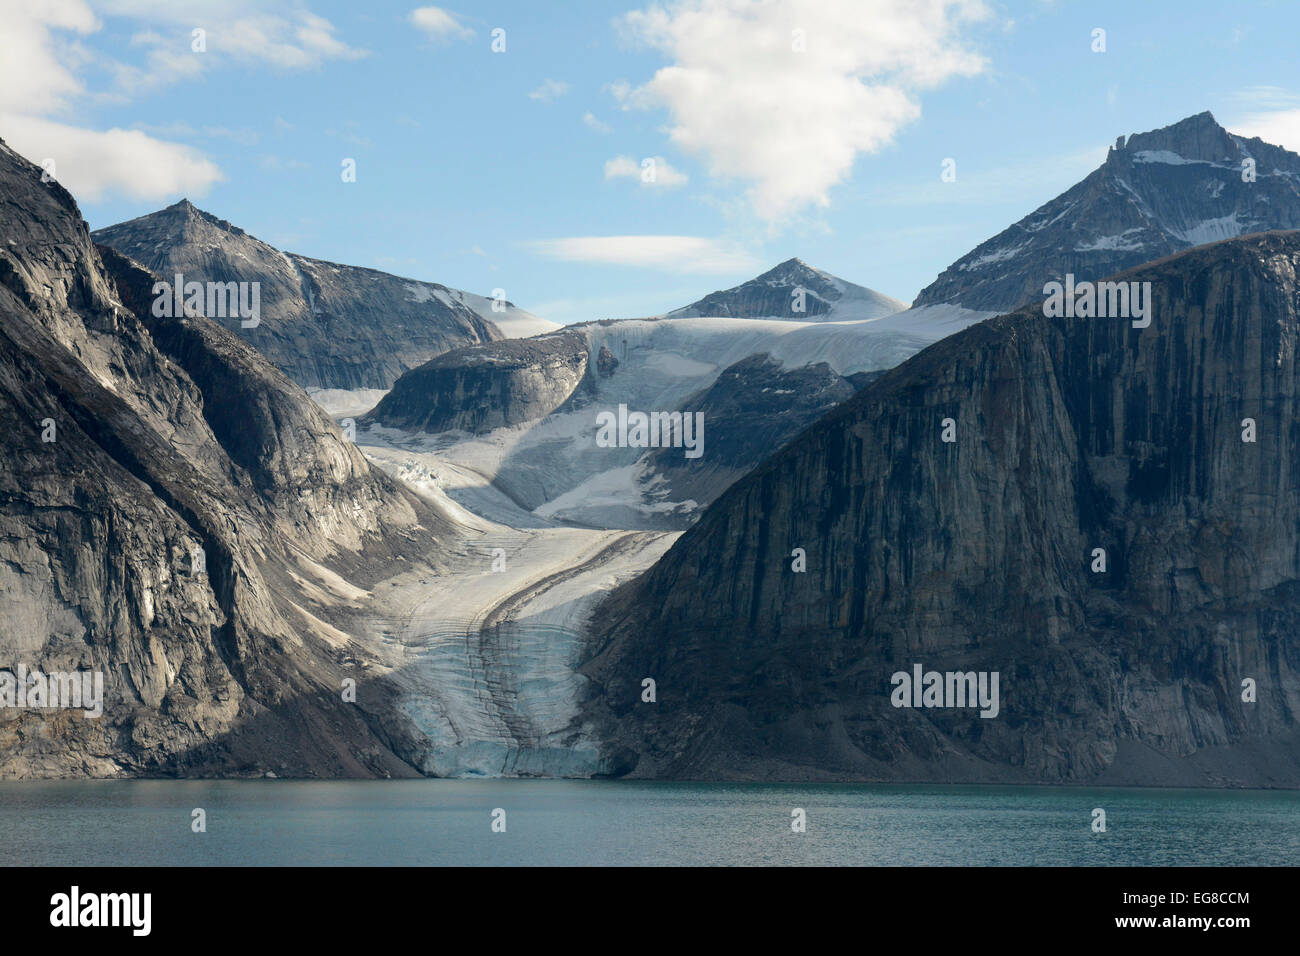 Baffin Island, Nunavut, Canada, showing glacier flowing into the sea, August Stock Photo